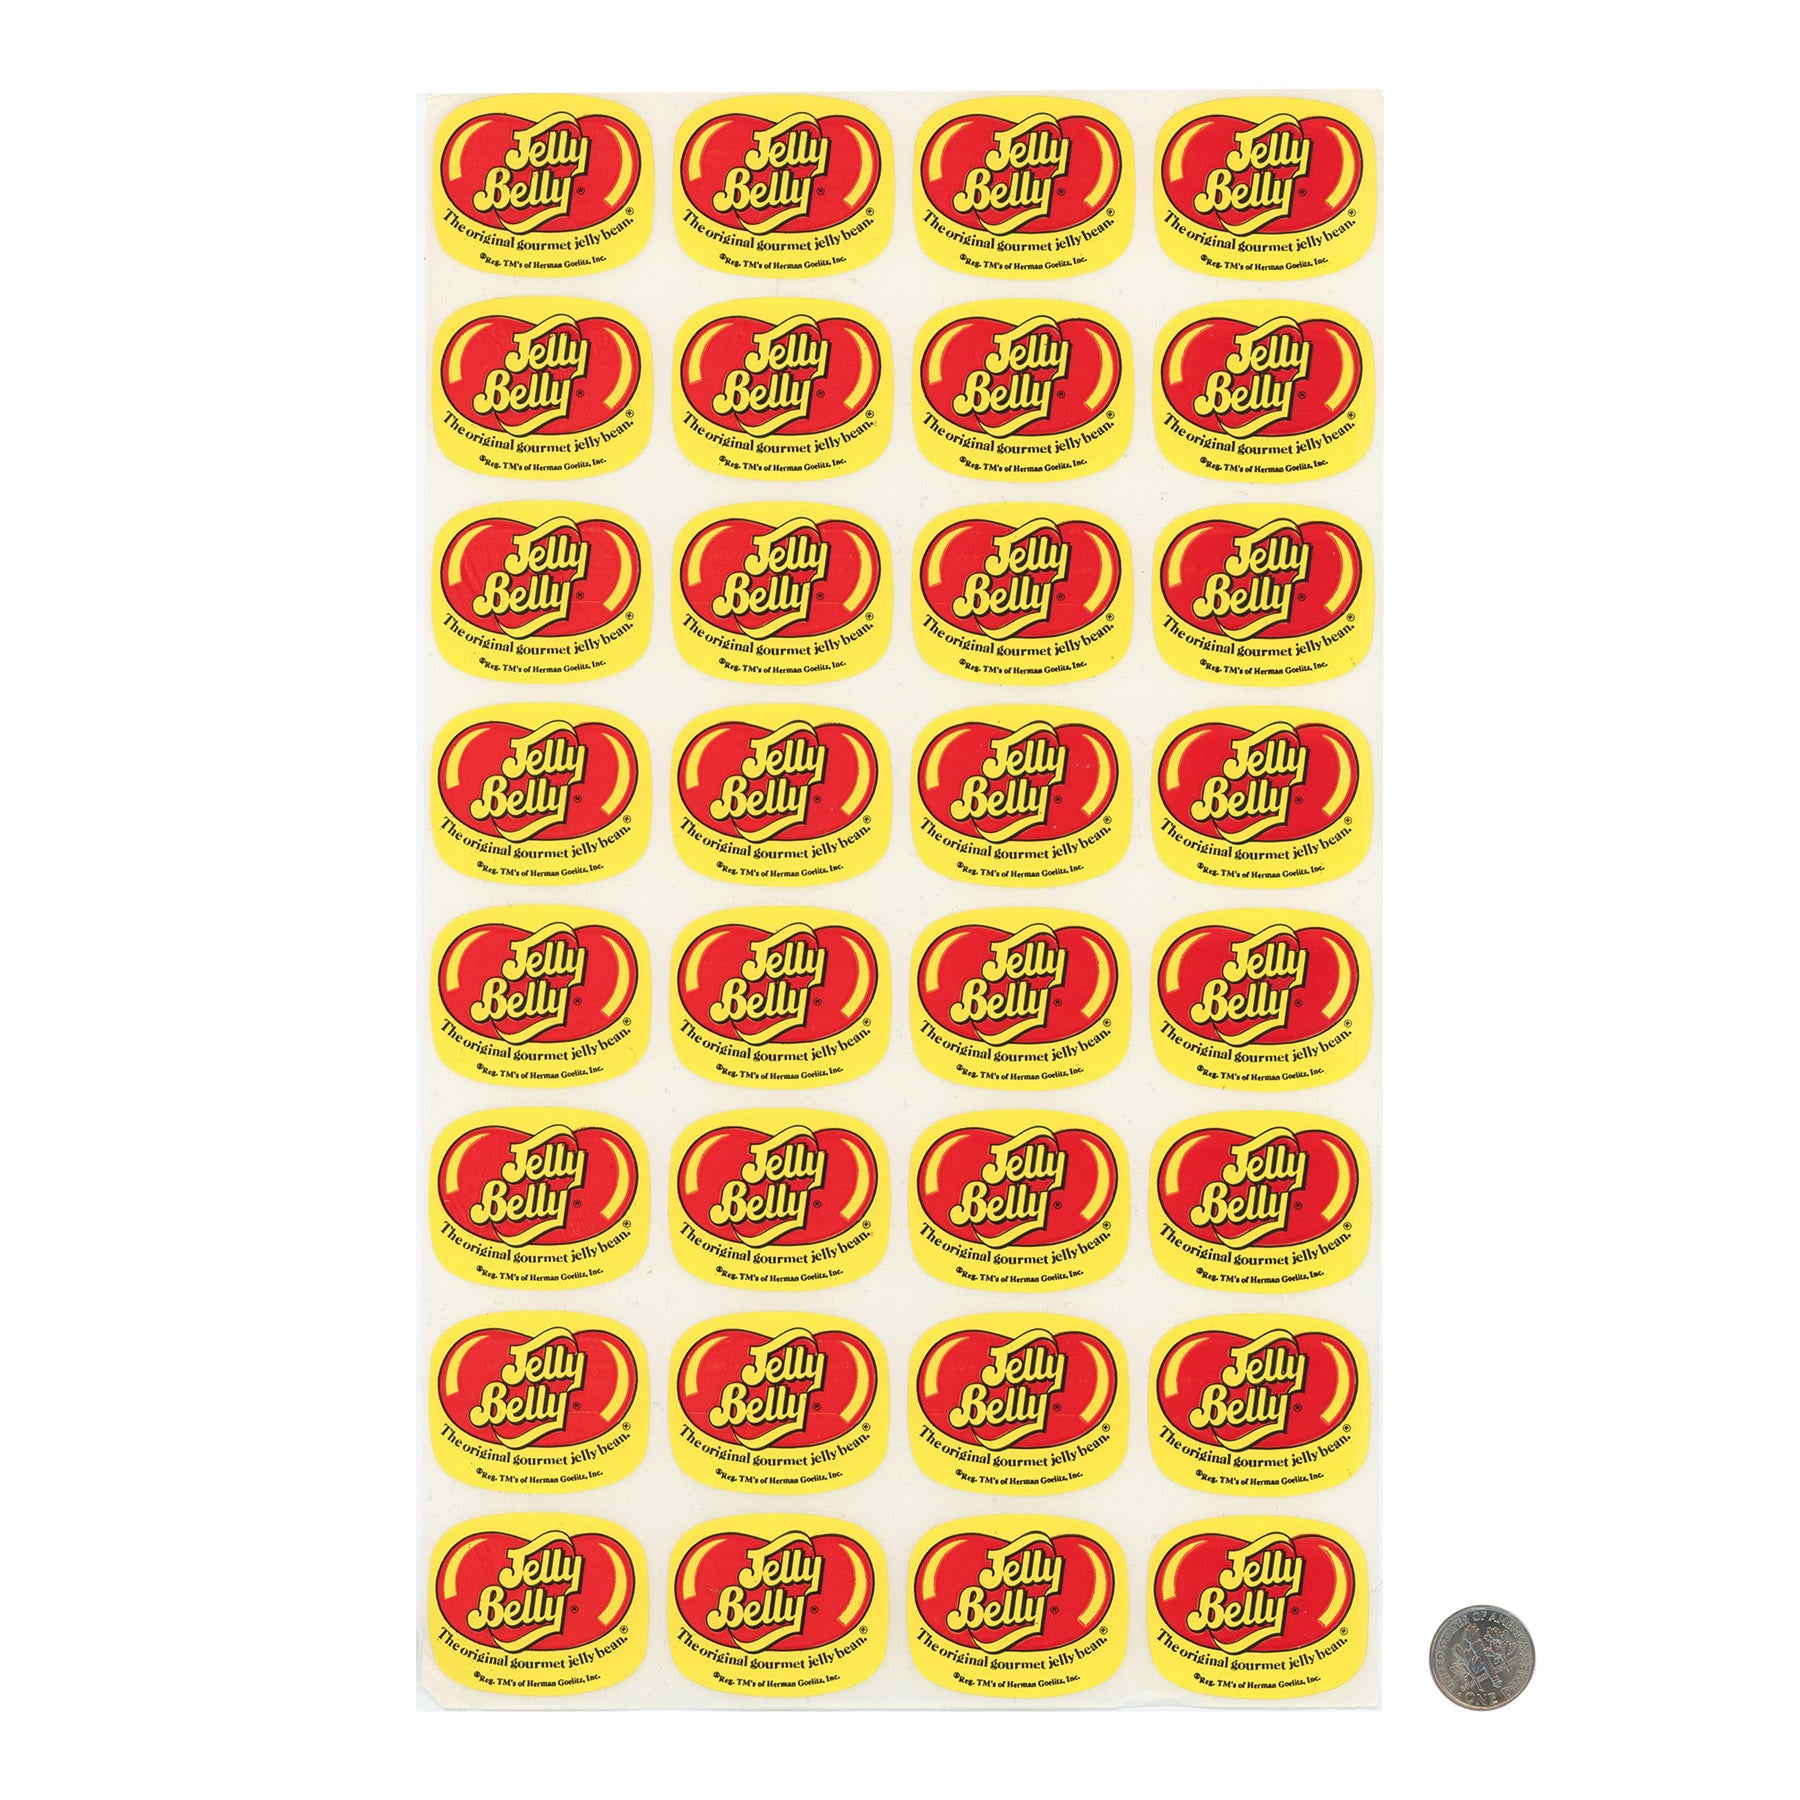 Jelly Belly Sticker Sheet with dime